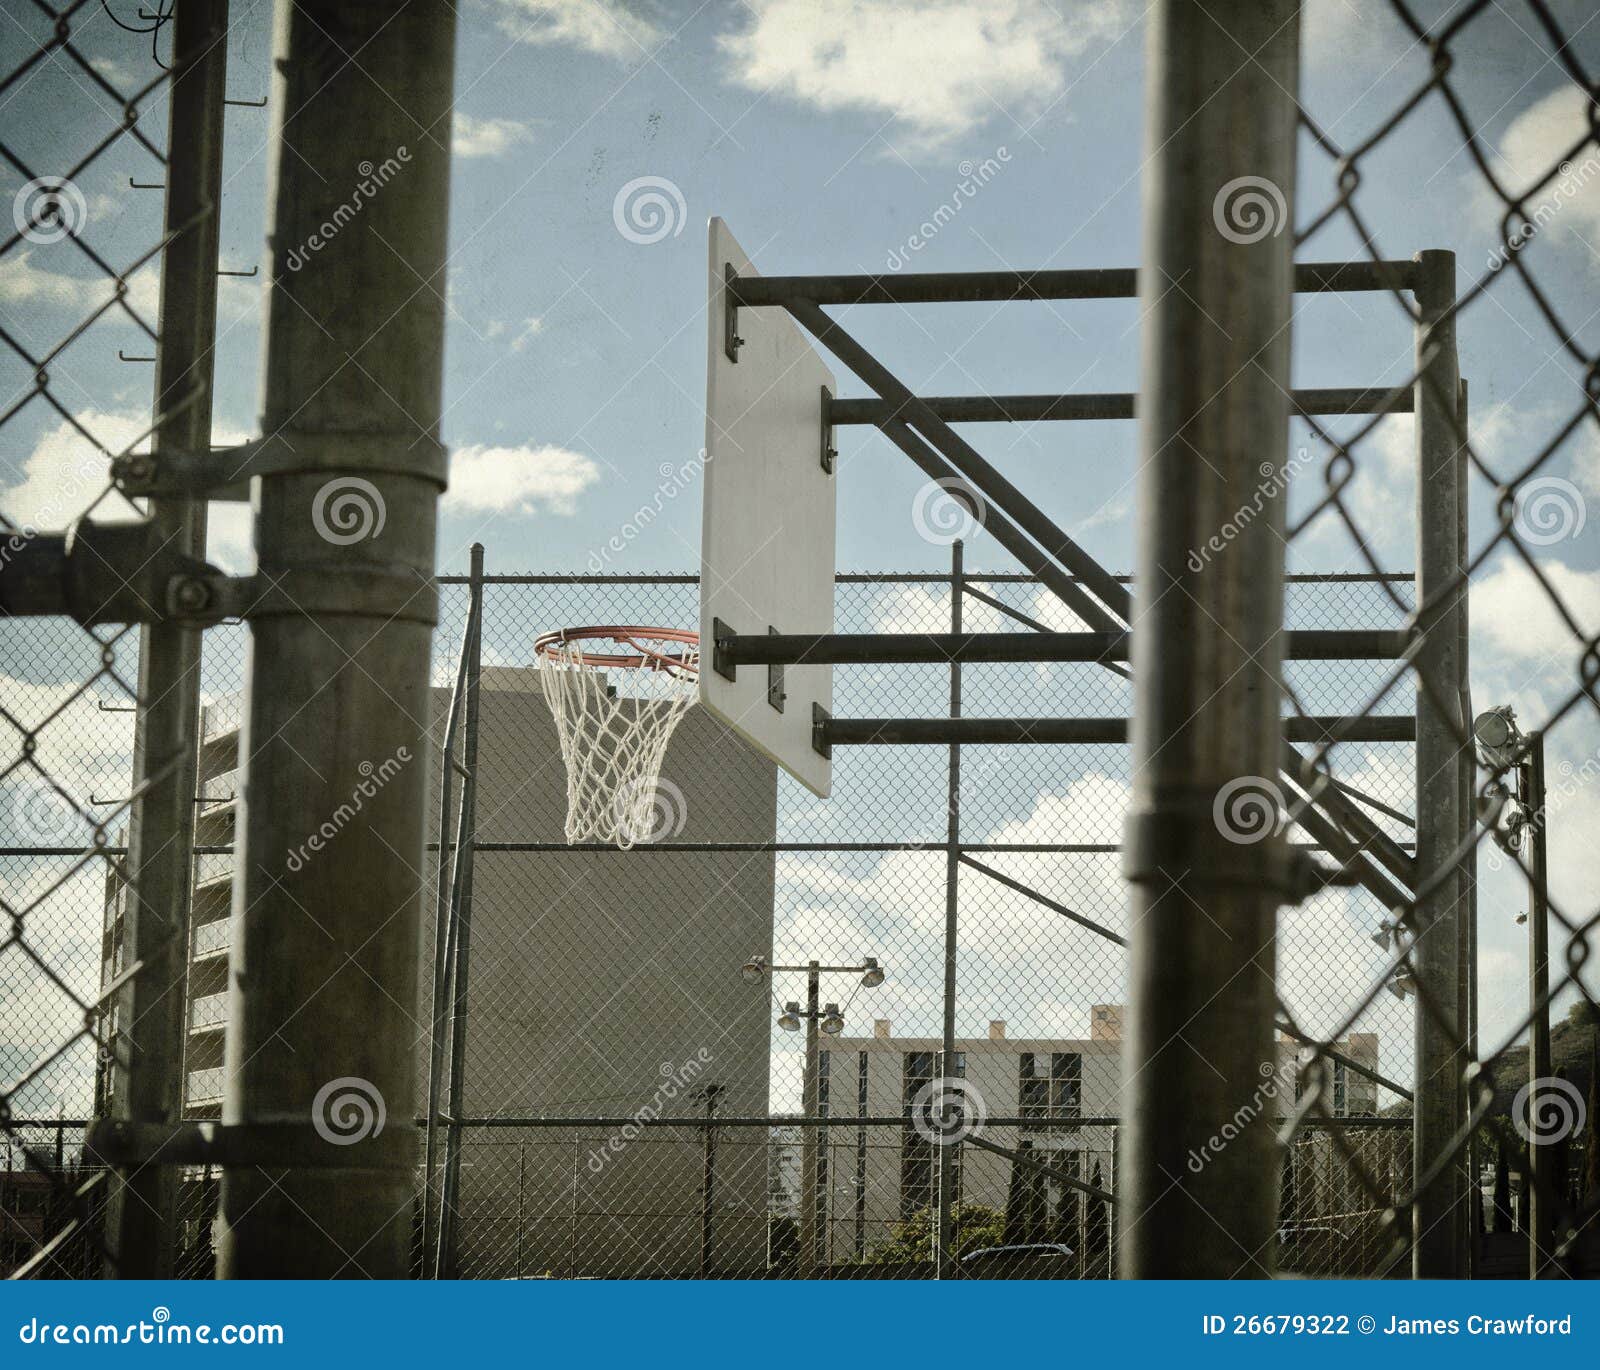 Basketball Court In Chain Link Stock Photo - Image of ball, city: 26679322
